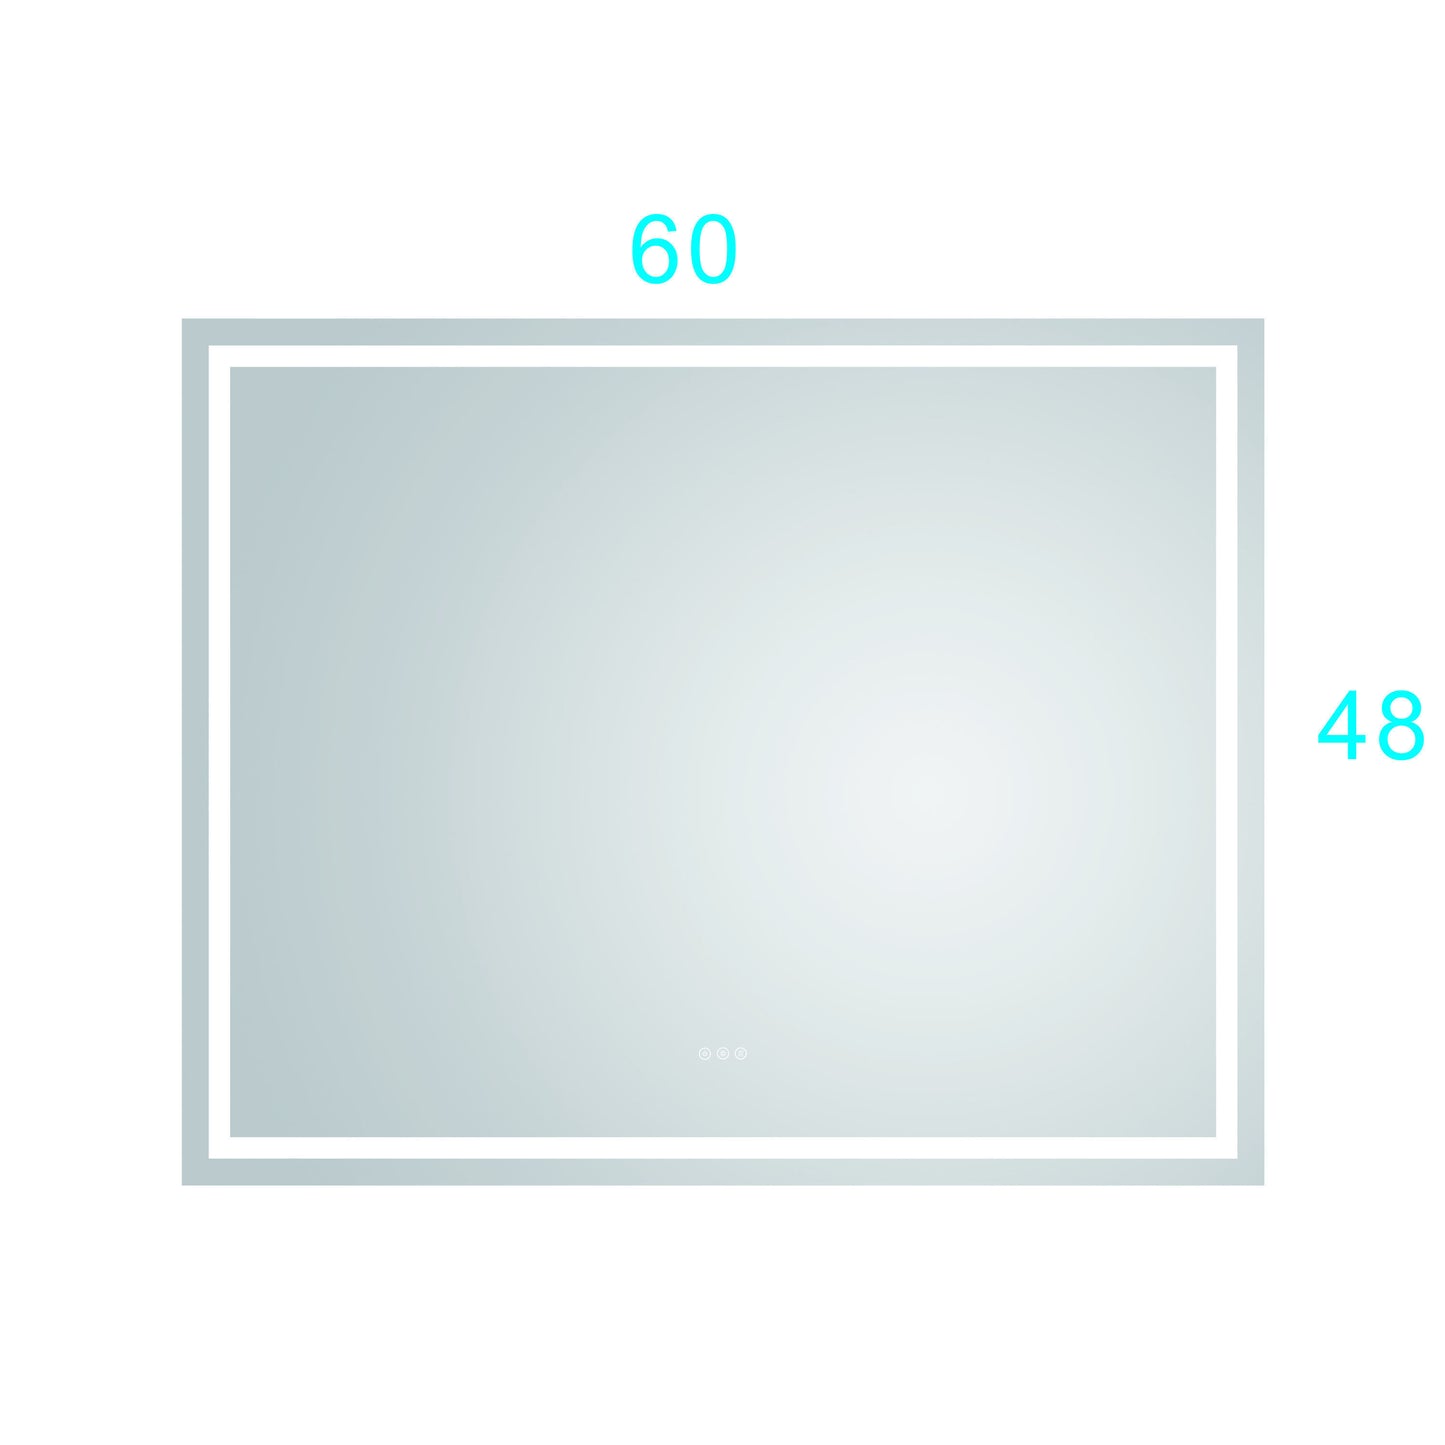 LTL needs to consult the warehouse address60*48LED Lighted Bathroom Wall Mounted Mirror with High Lumen+Anti-Fog Separately Control+Dimmer Function